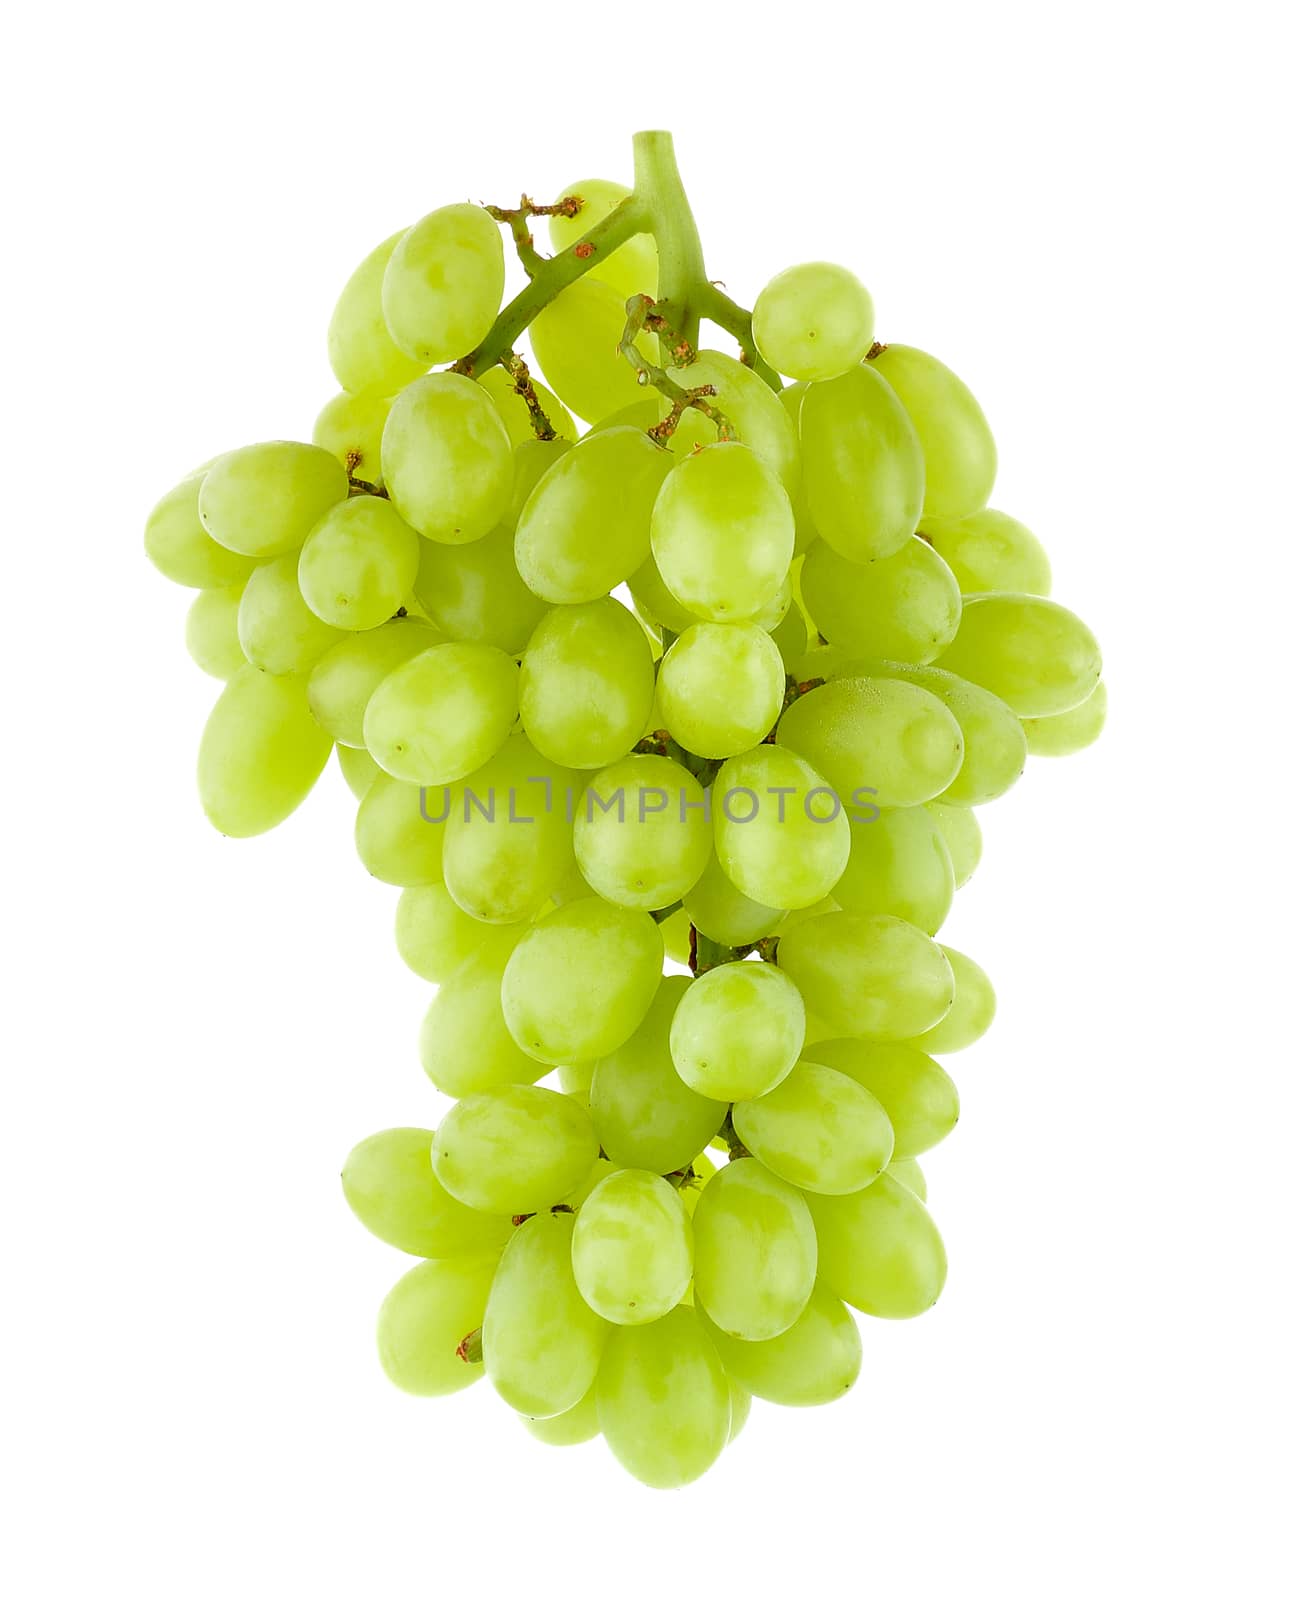  green grapes Isolated on white background